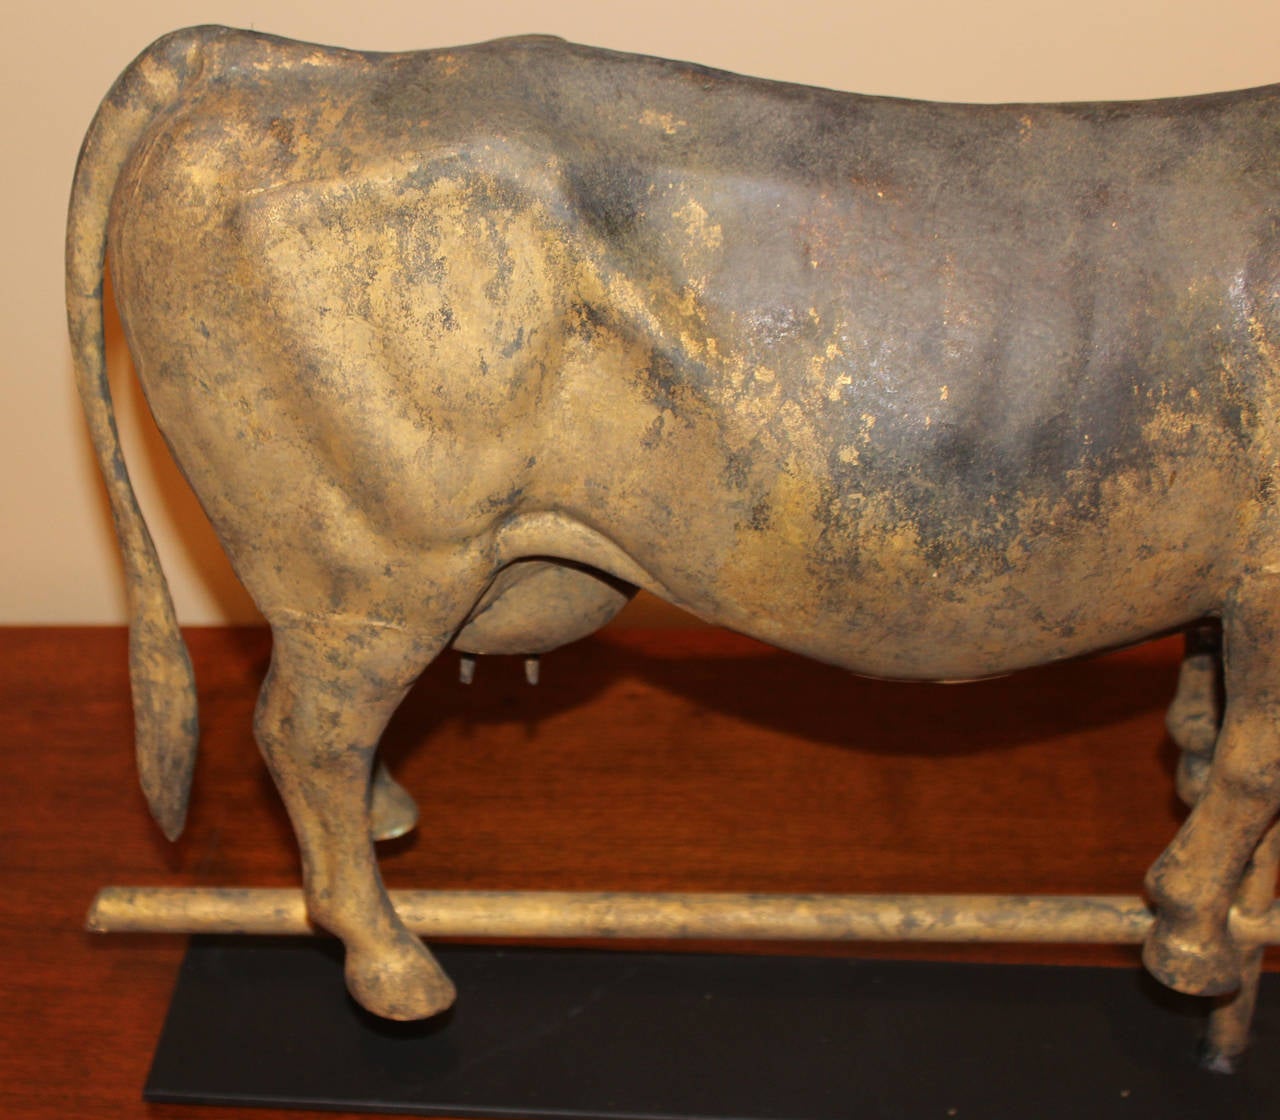 A nicely detailed weathervane with full body of a cow, zinc head and hollow copper body,  including  udder,  made by the J.W. Fiske & Co., New York City. Dates to the late 19th century.